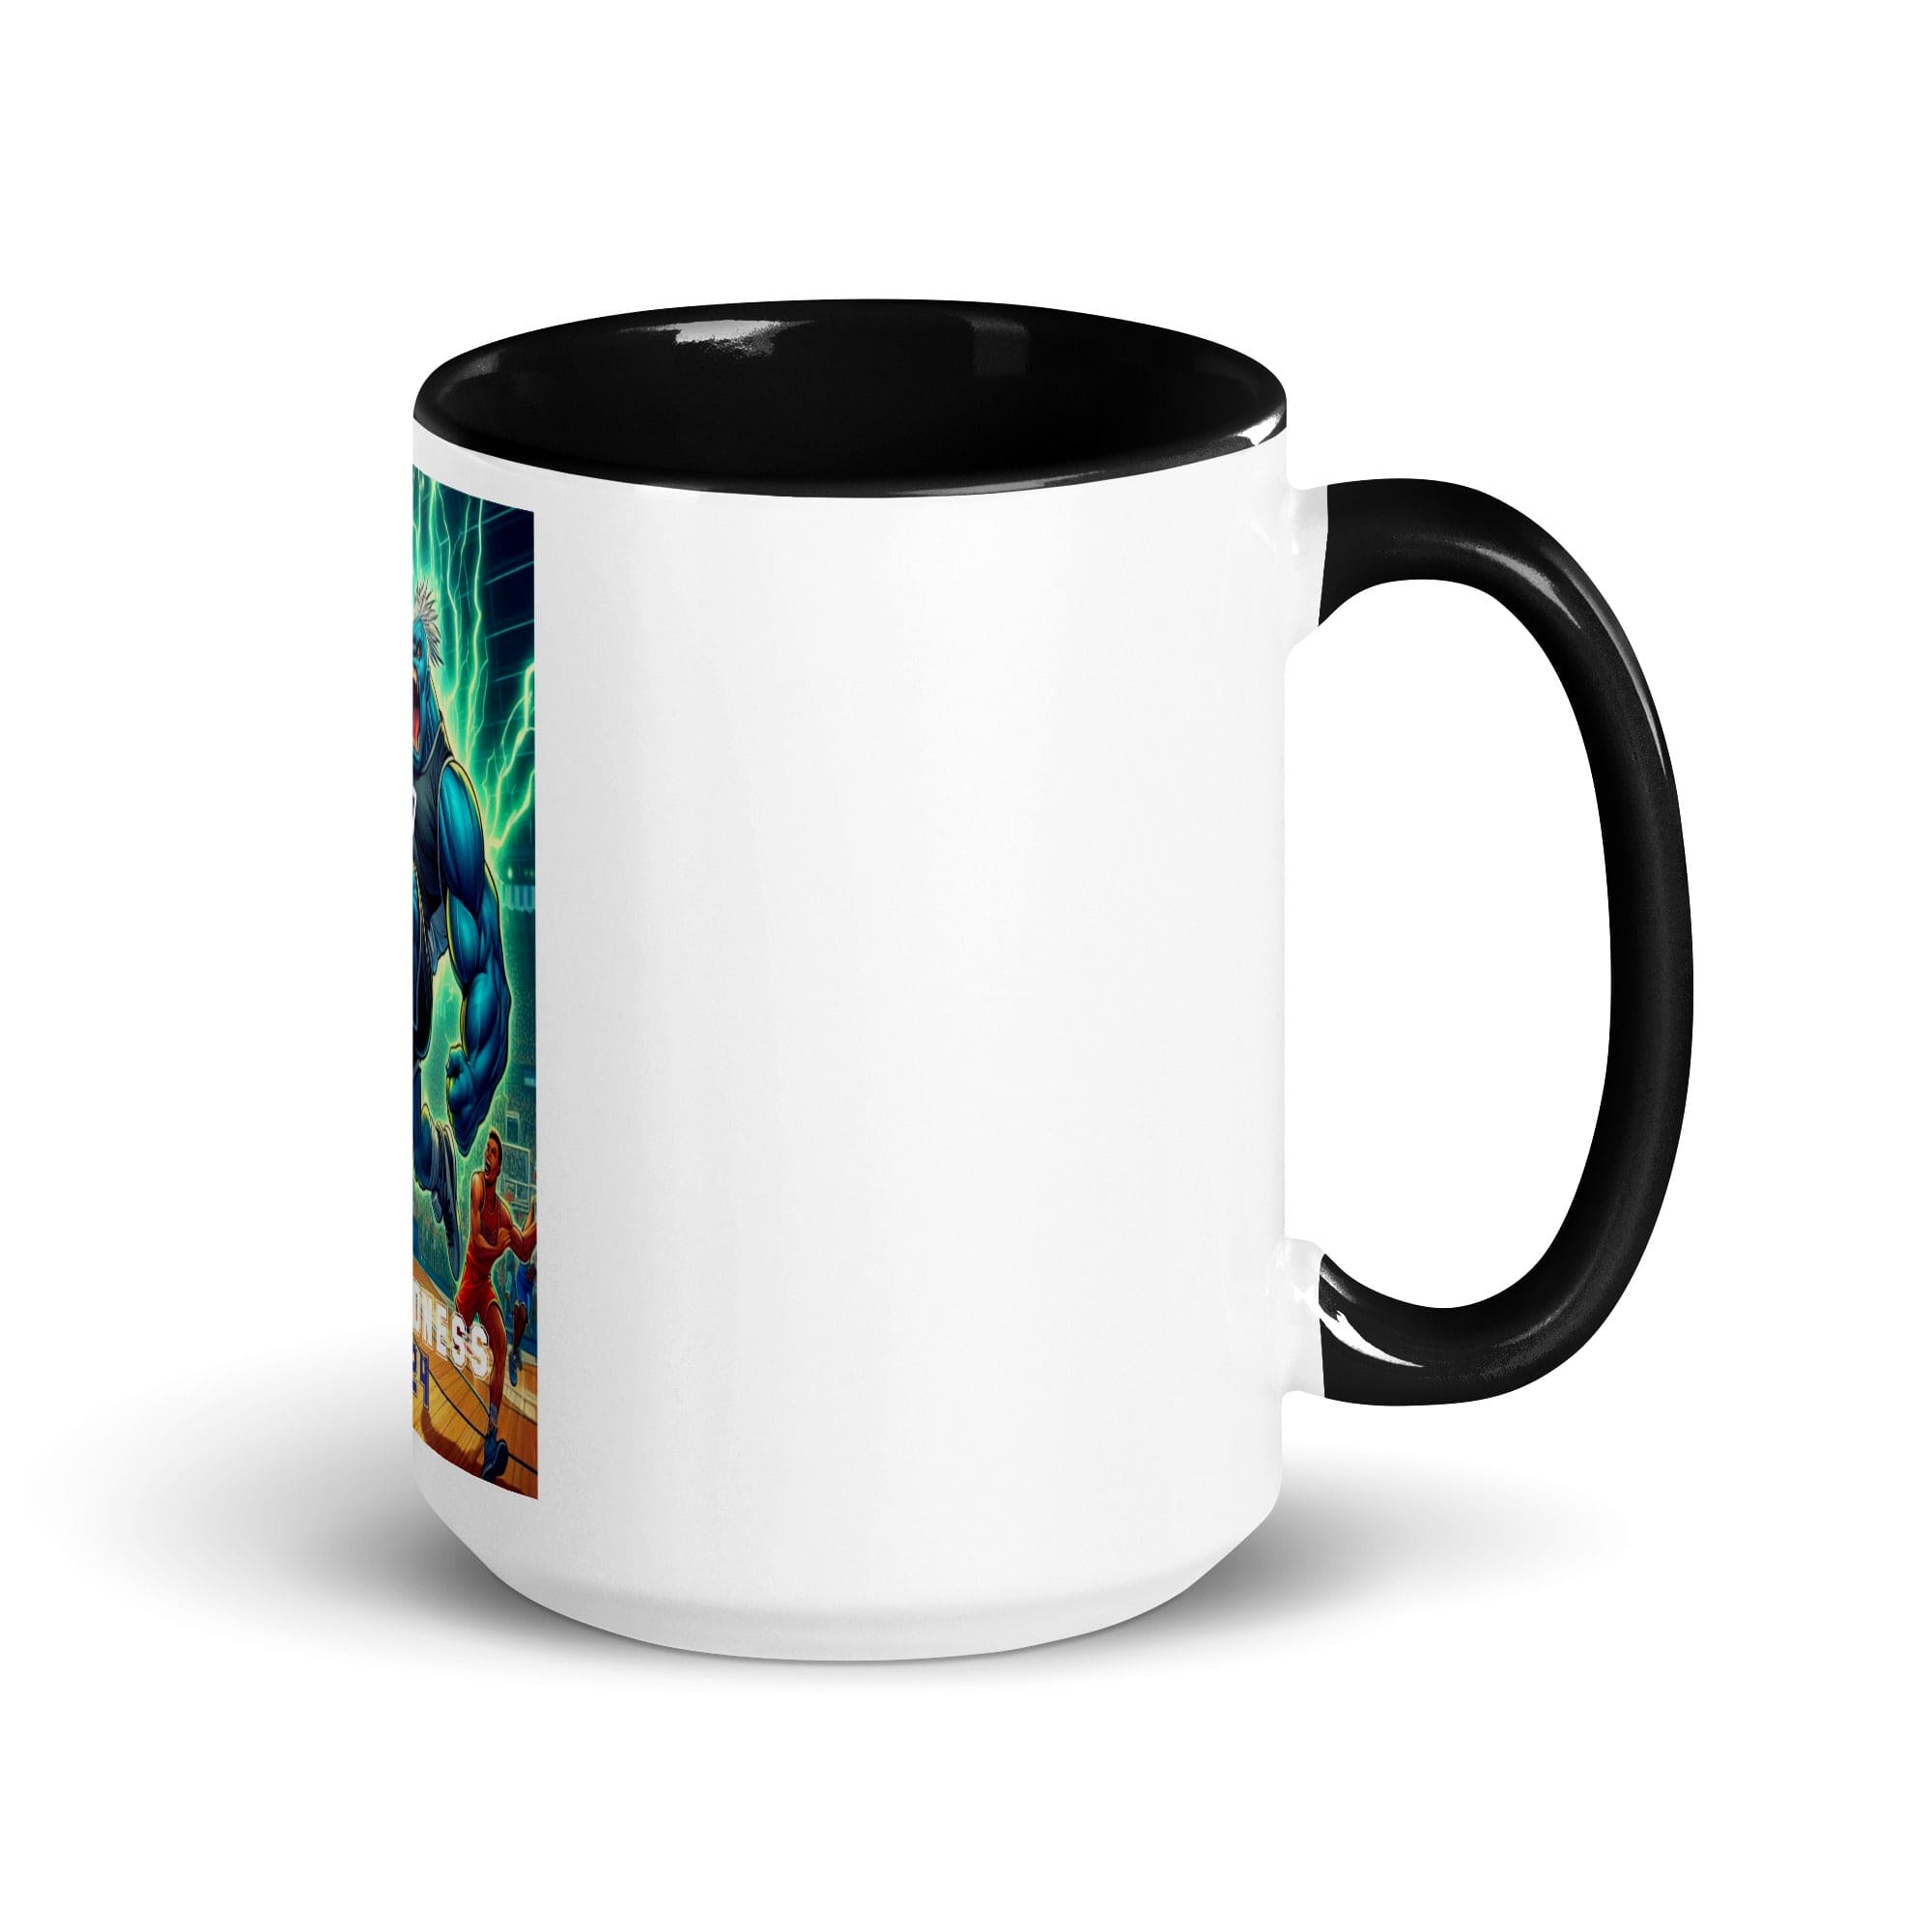 Interior Accented Mugs for Every Sip